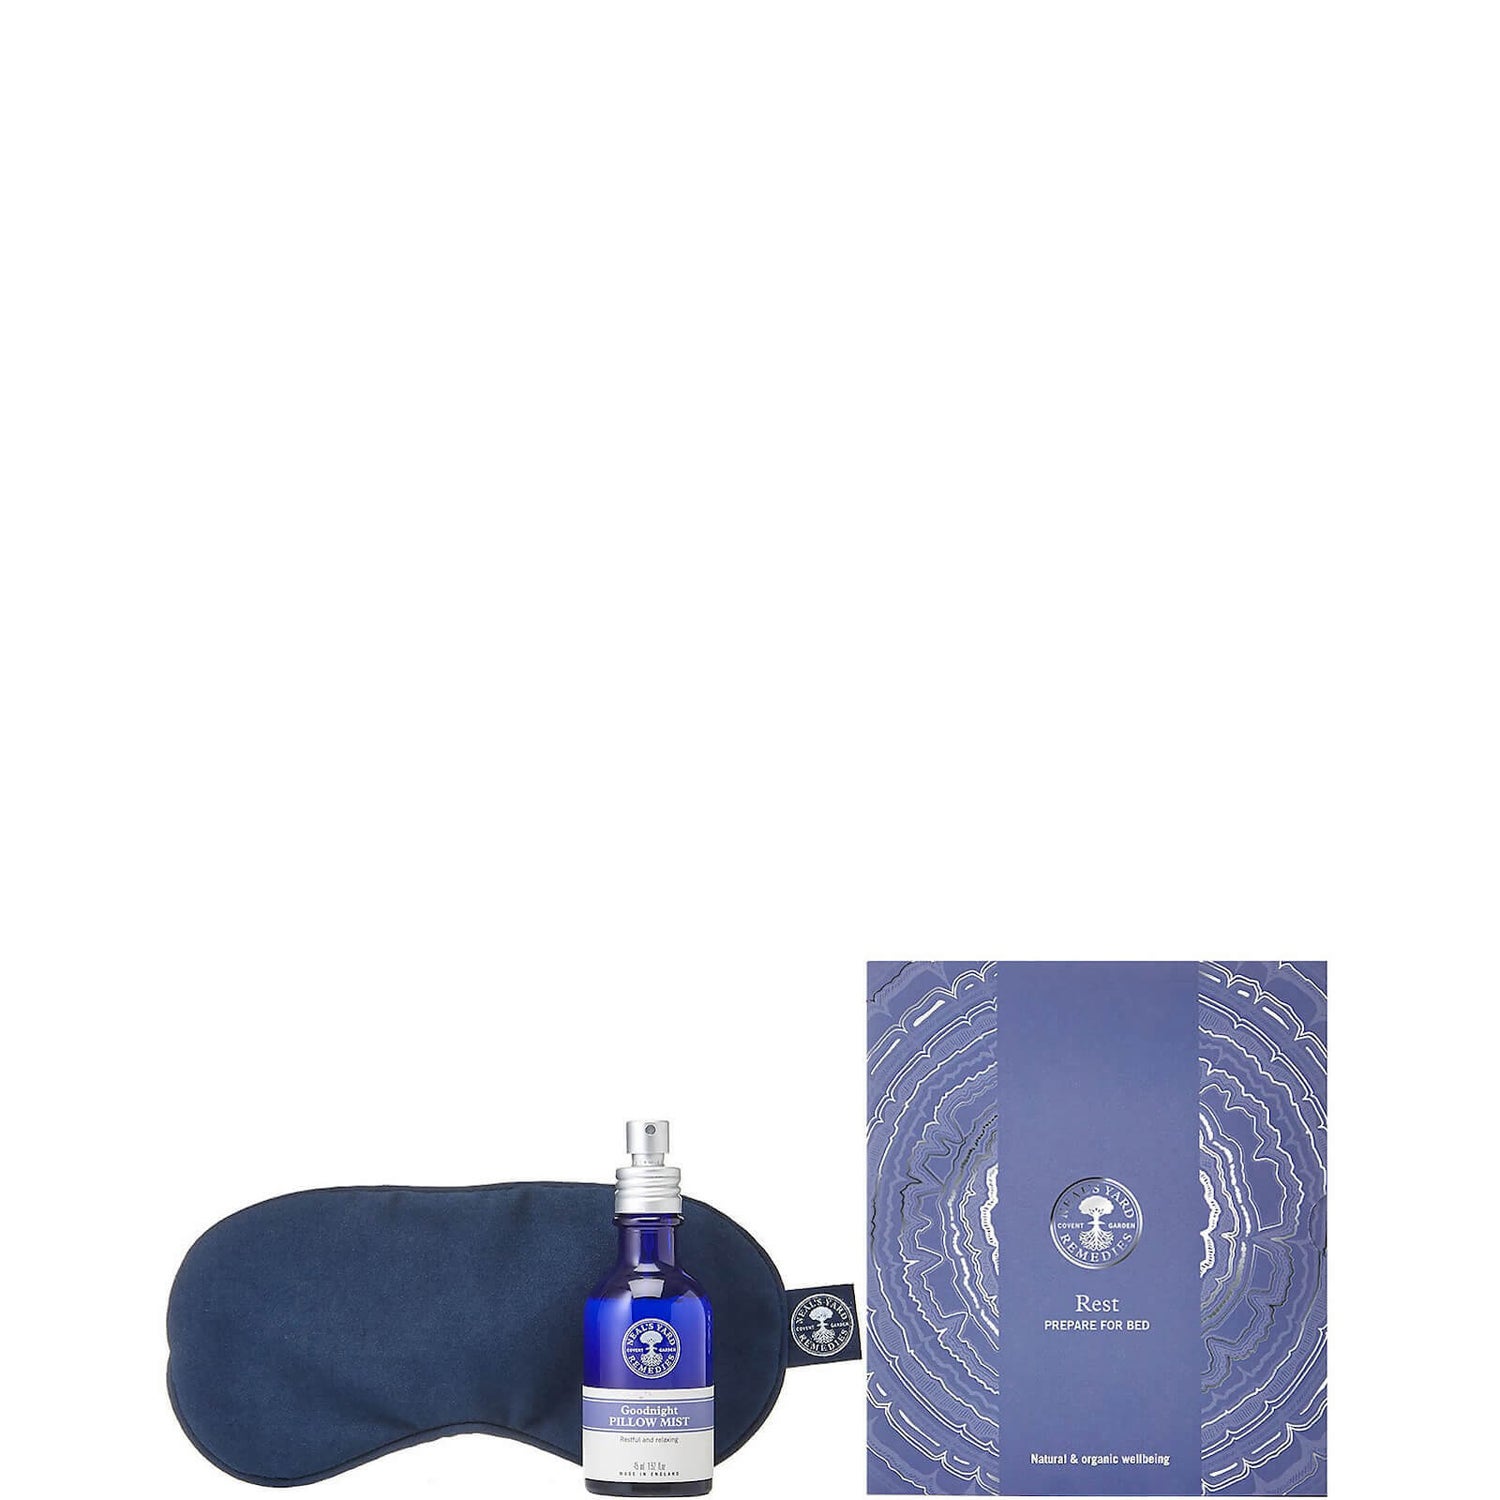 Neal's Yard Remedies Rest Prepare For Bed